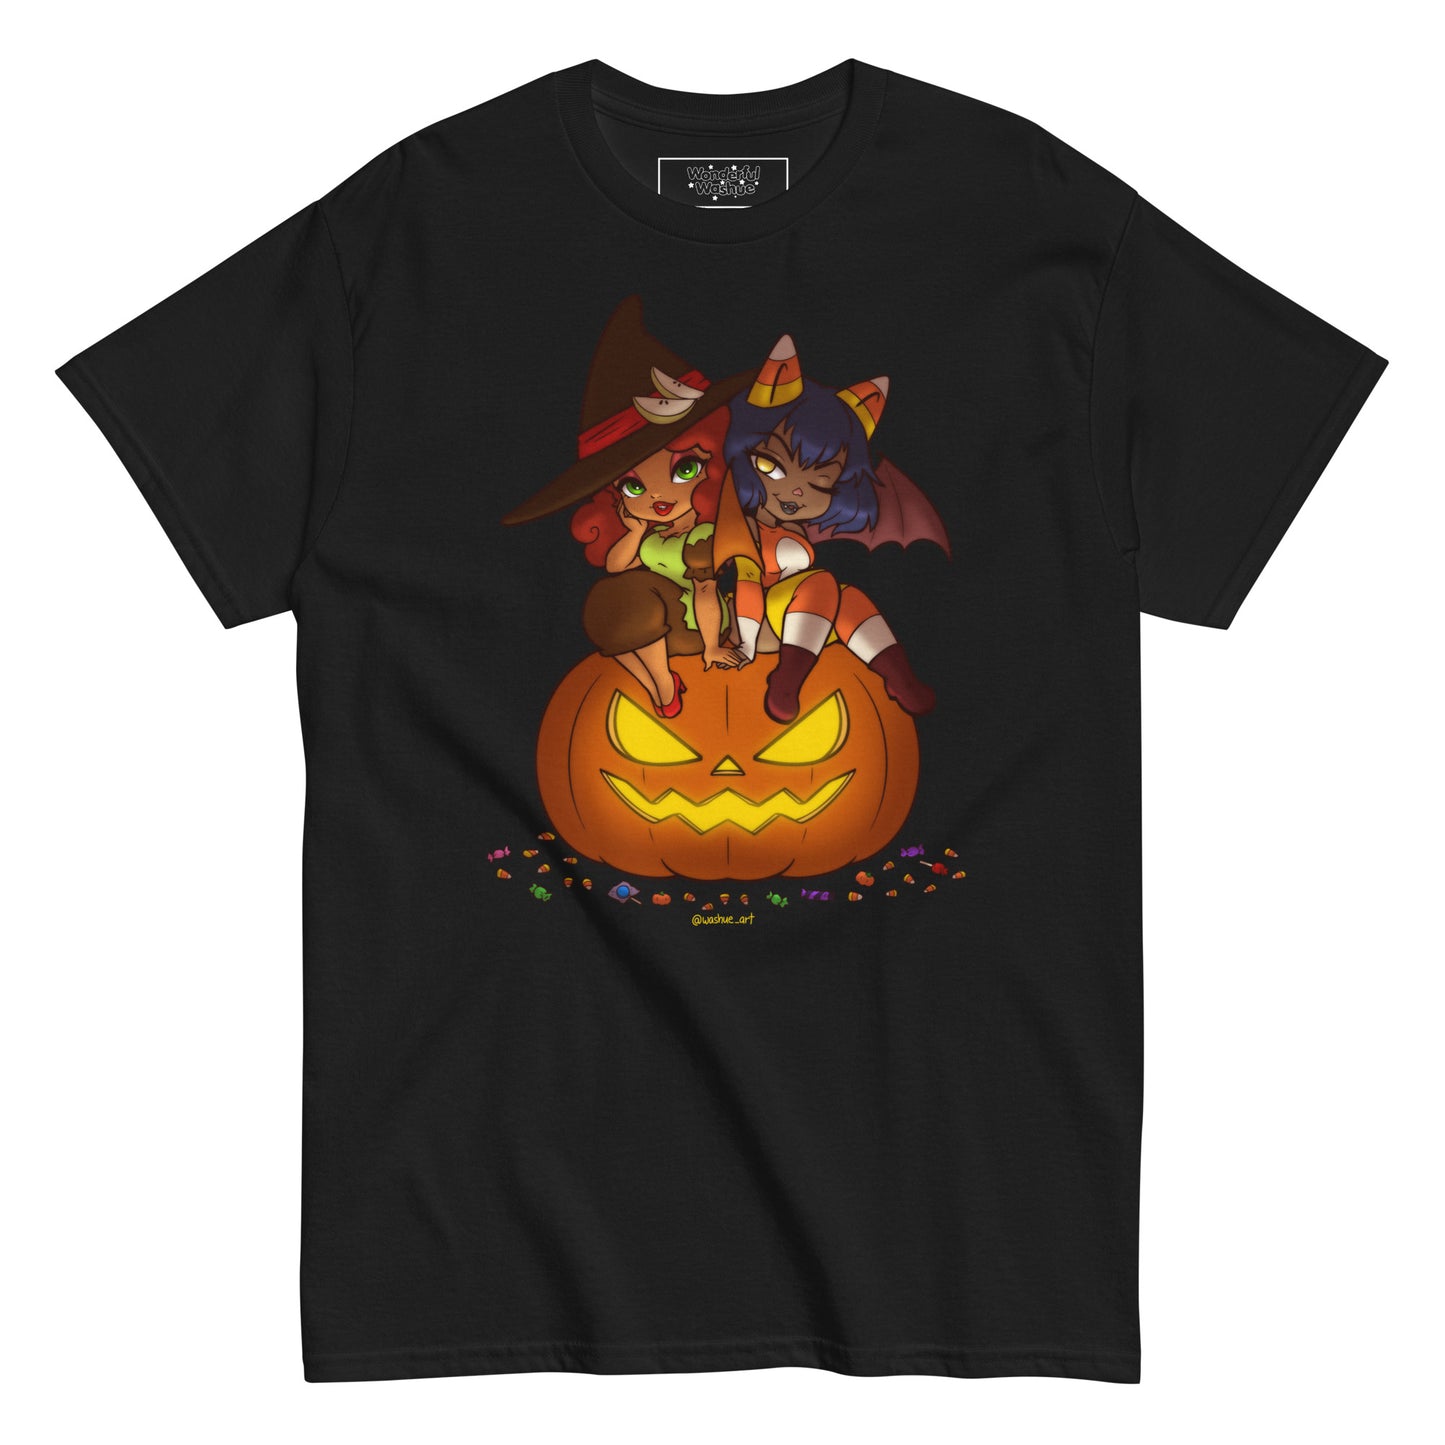 Candy Apple and Candy Corn Halloween T-Shirt